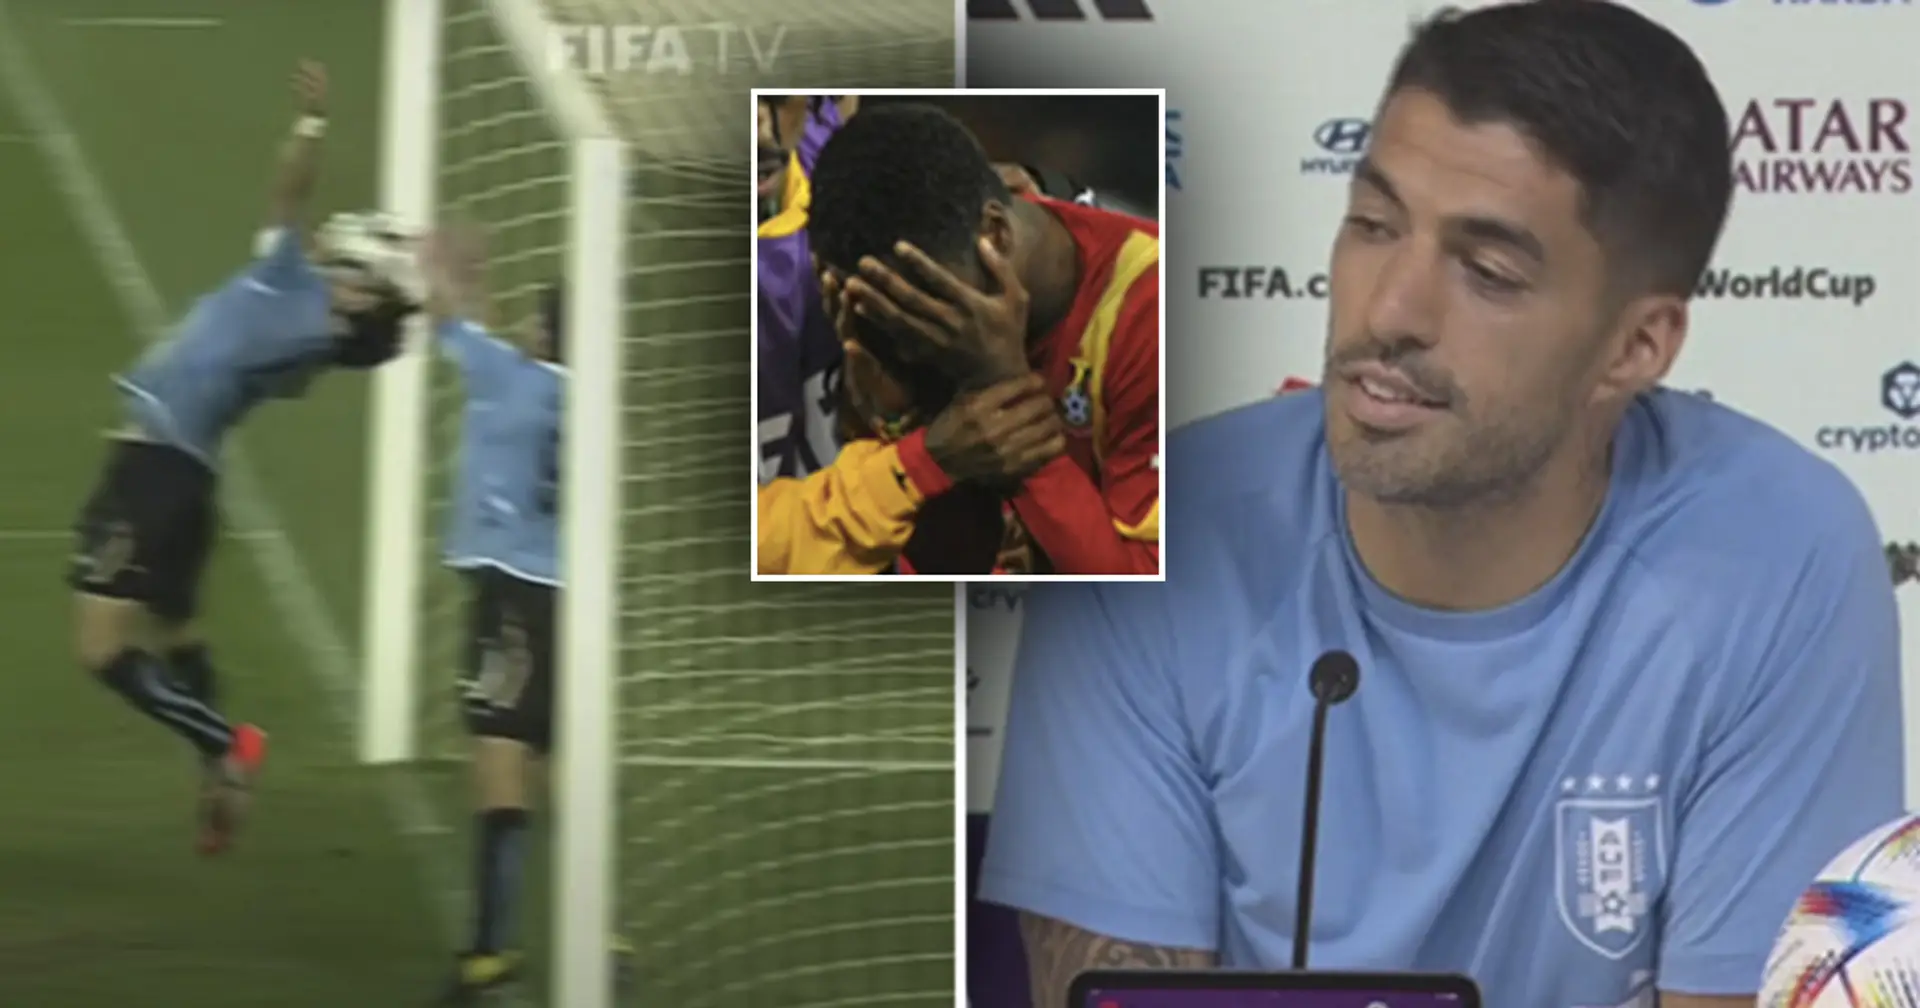 Luis Suarez branded as 'the devil himself' by Ghana reporter: what happened